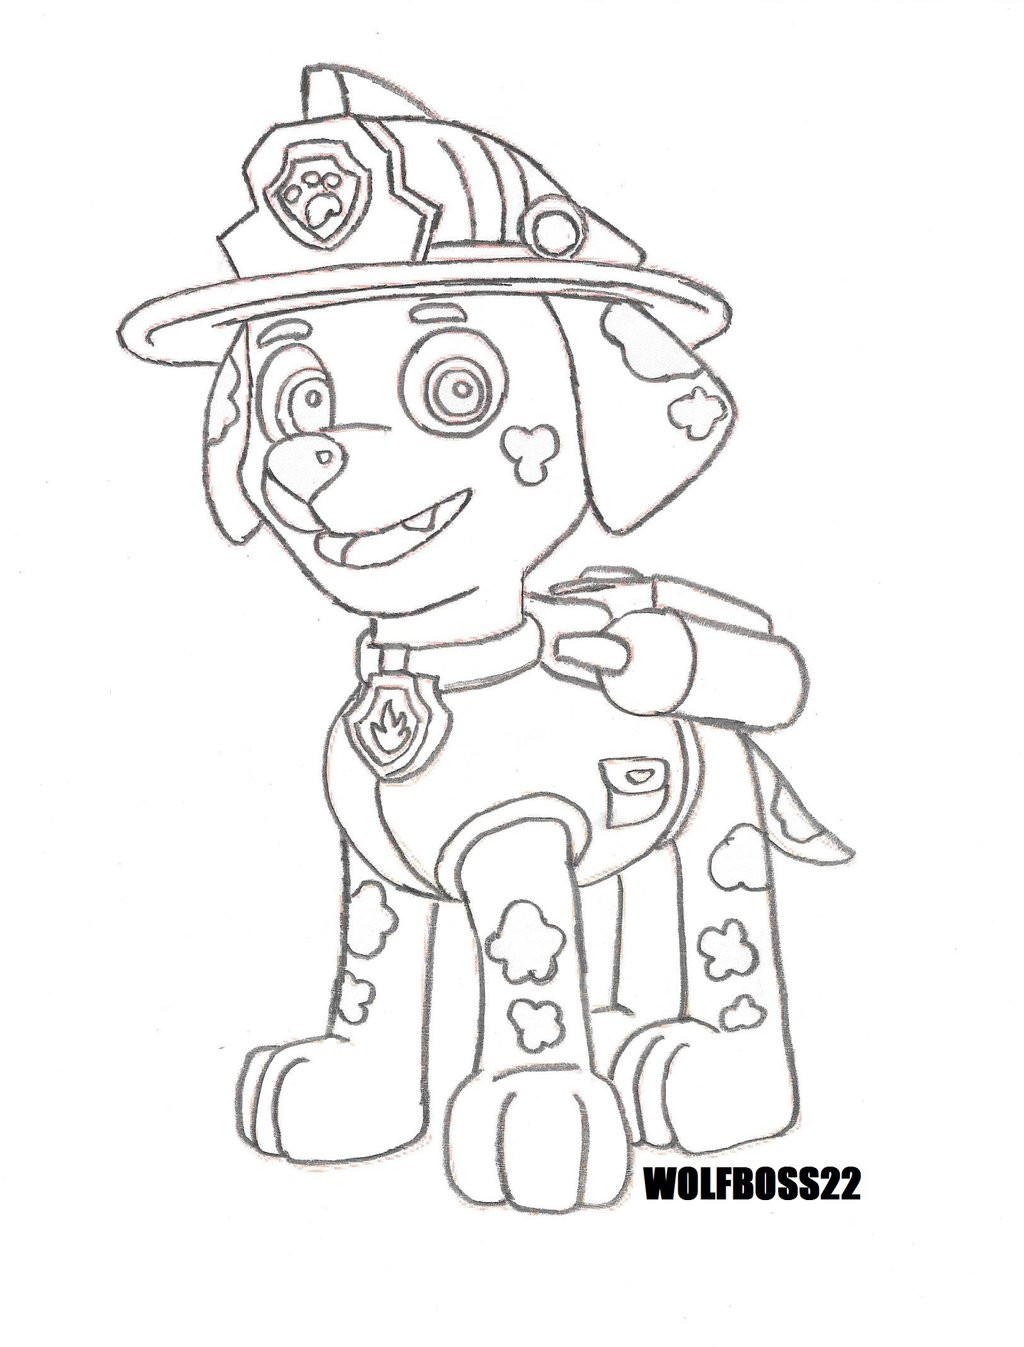 Paw Patrol Coloring Pages Marshall
 Paw Patrol Marshall Line Art by wolfboss22 on DeviantArt